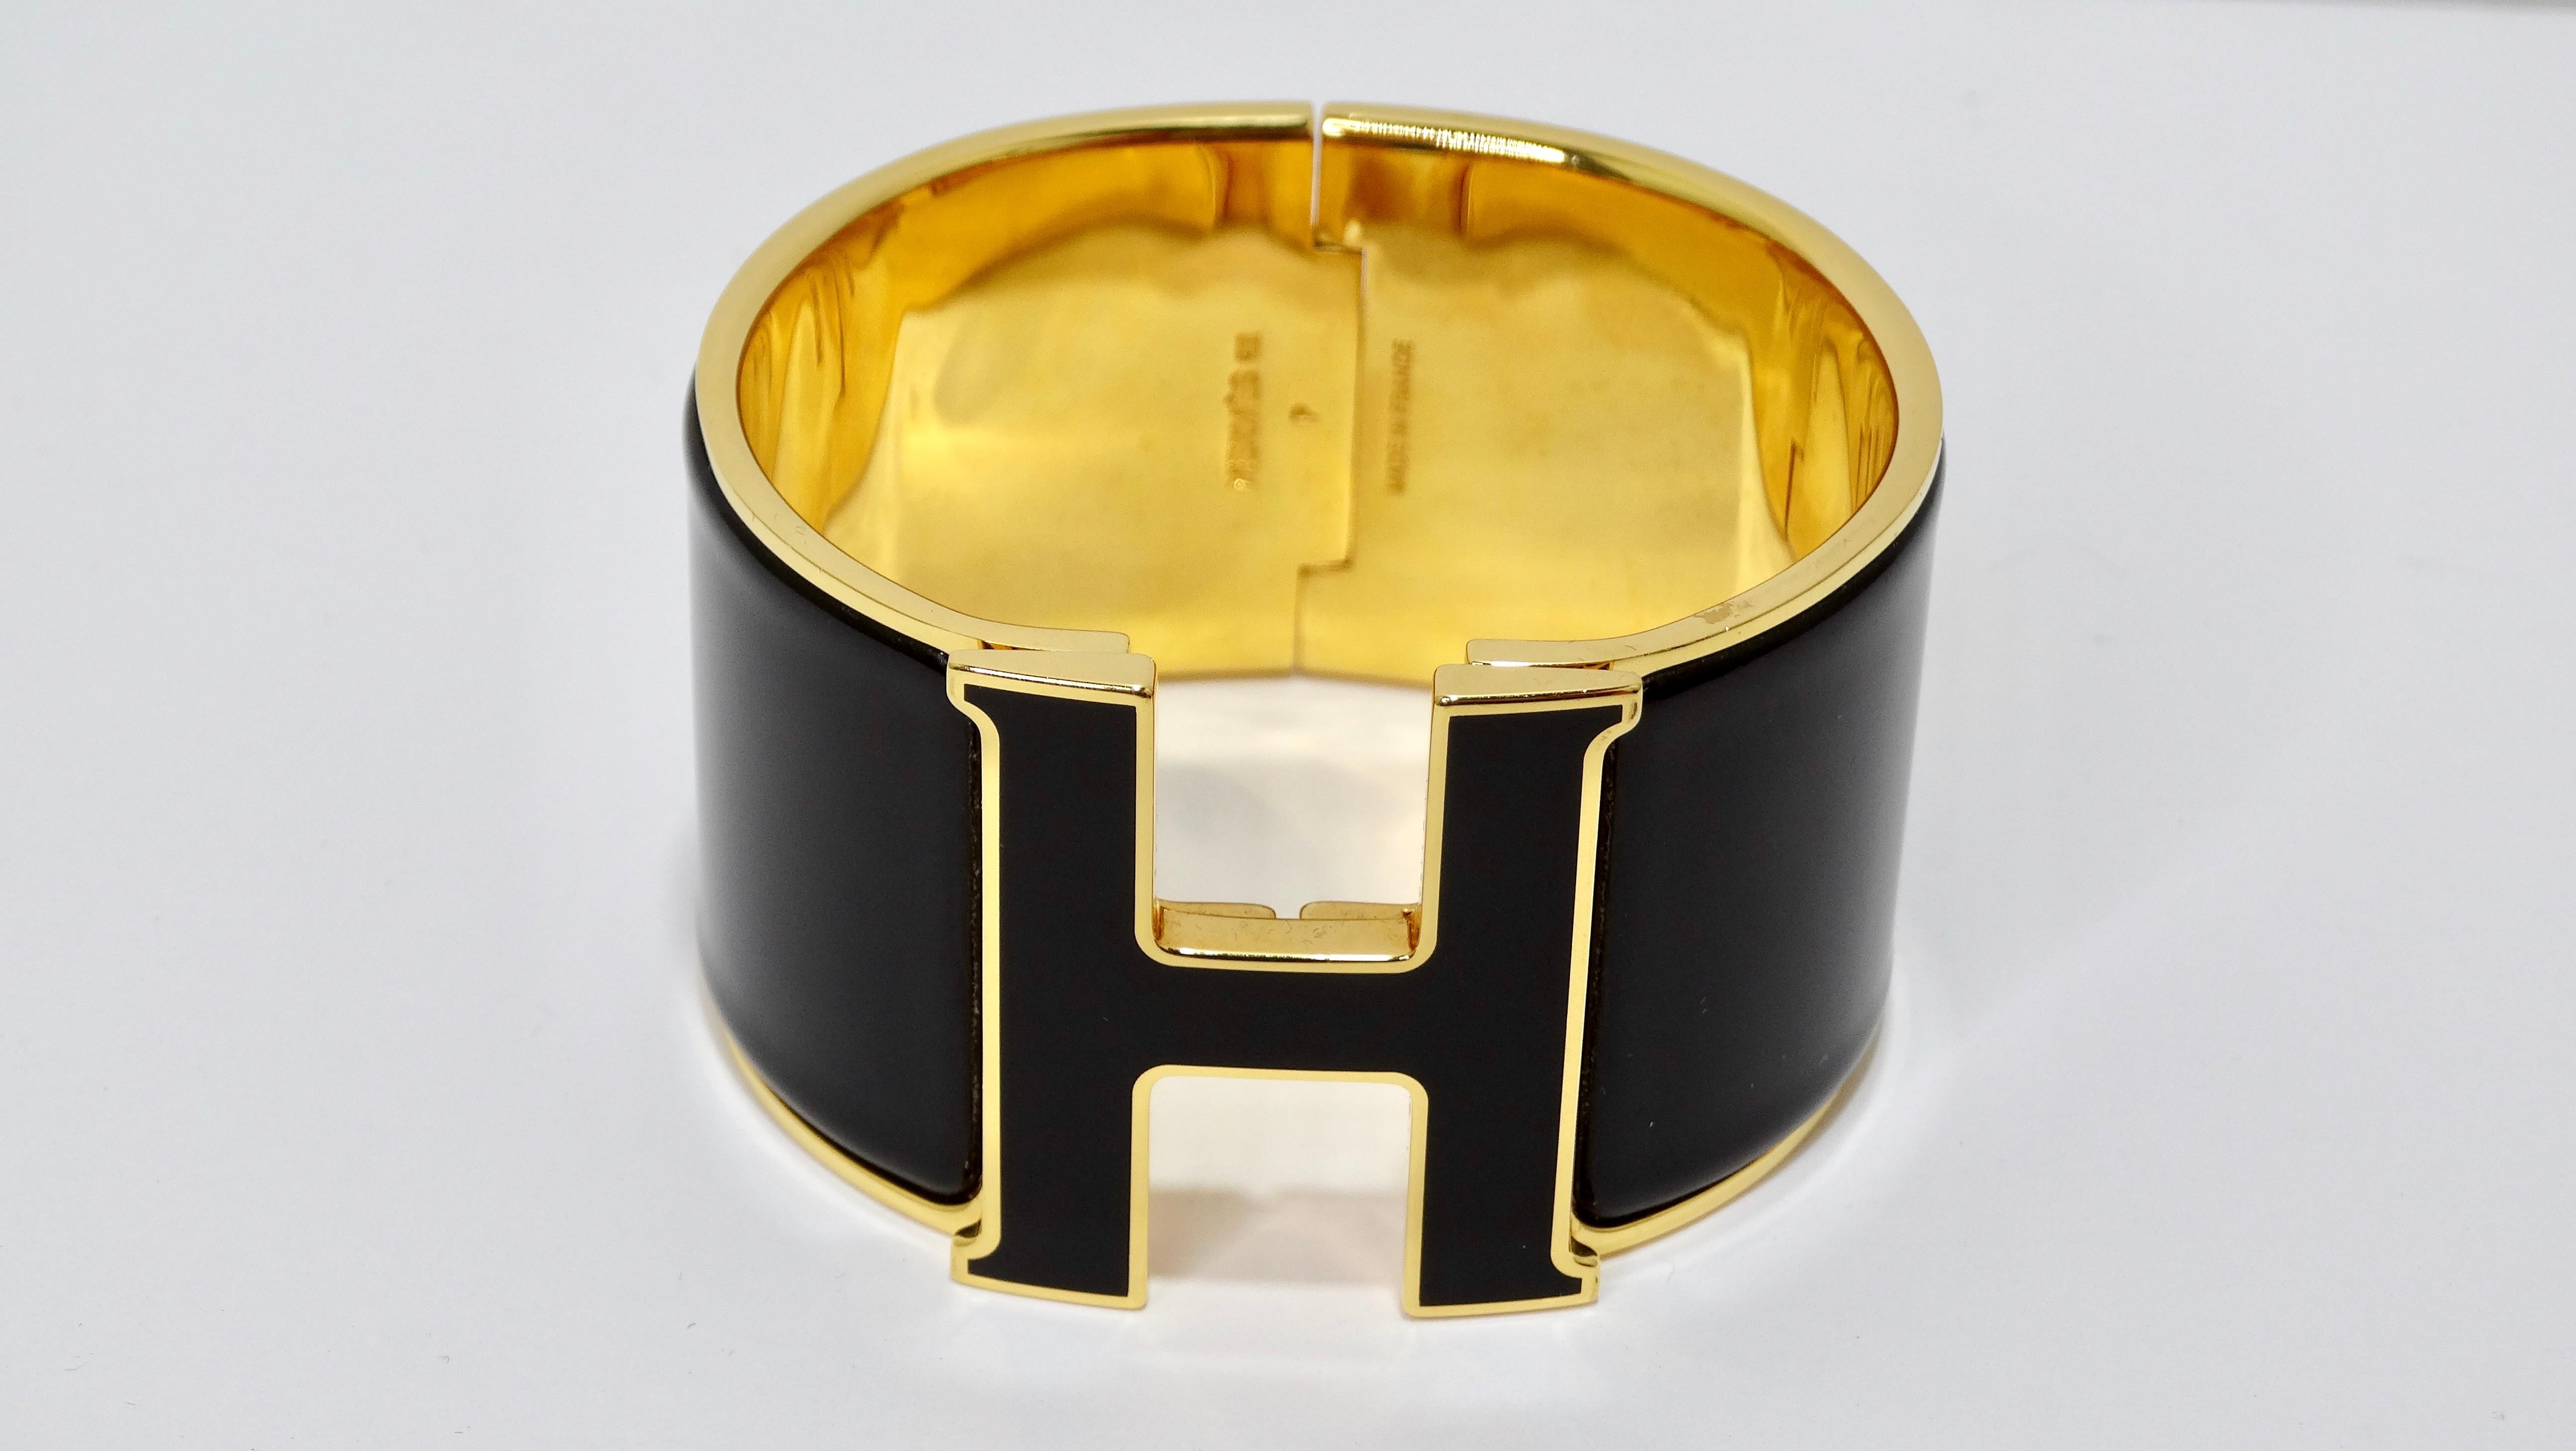 Snag this piece of Hermes history today! This is a beautiful piece of wearable art from none other than Hermes. This is casual enough to be your new everyday bracelet and will bring an extra flair to any outfit. This bracelet features a vibrant and